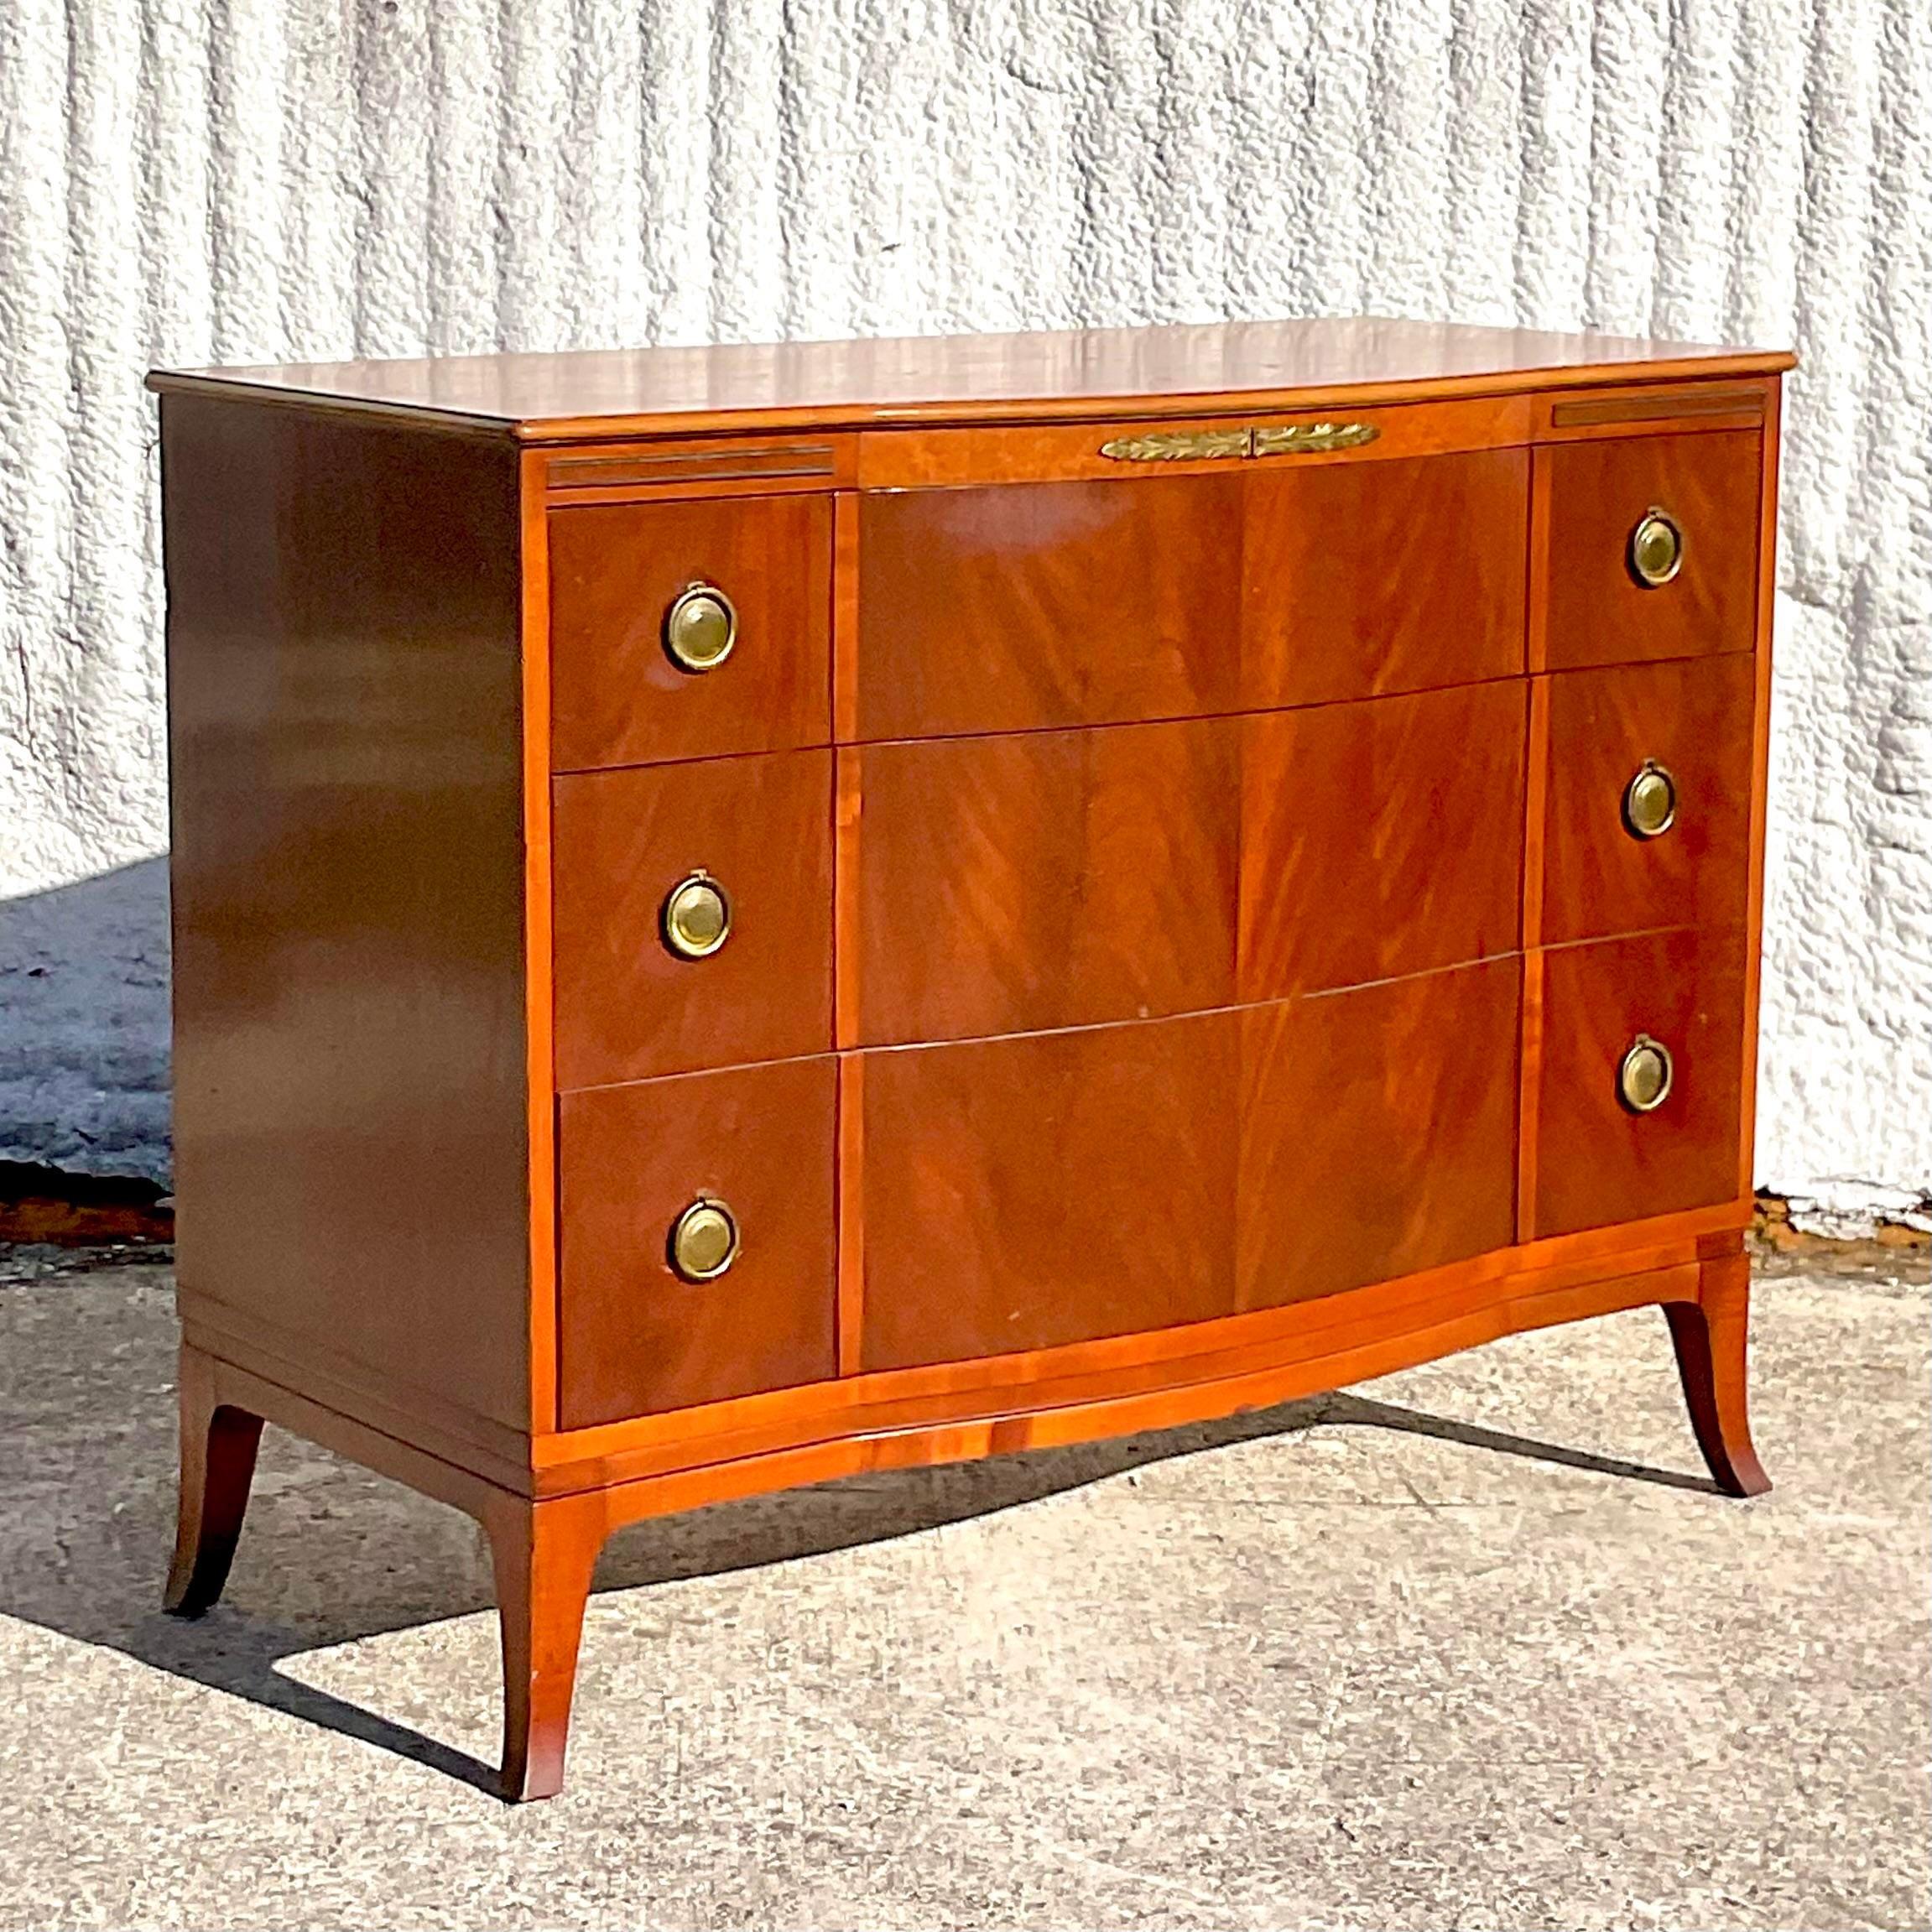 A stunning vintage Regency chest of drawers. Made by the iconic John Stuart group. Beautiful flame Mahogany with brass laurel detail. Signed on the inside. Perfect as a chest, sideboard or entry console. You decide! Acquired from a Palm Beach estate.